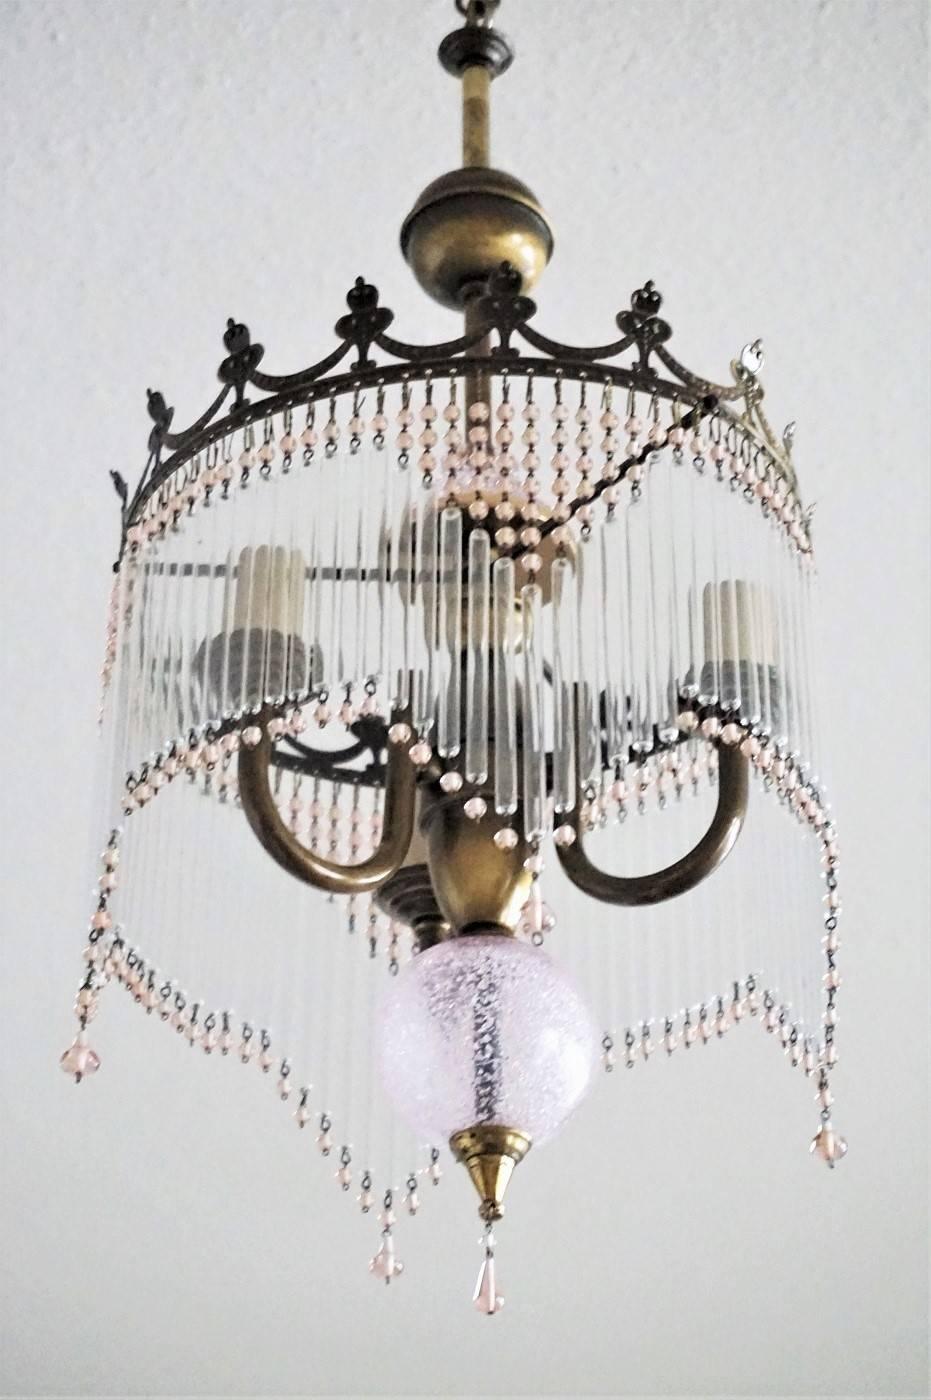 Burnished Mid-20th Century French Vintage Three-Light Chandelier with Glass Rods